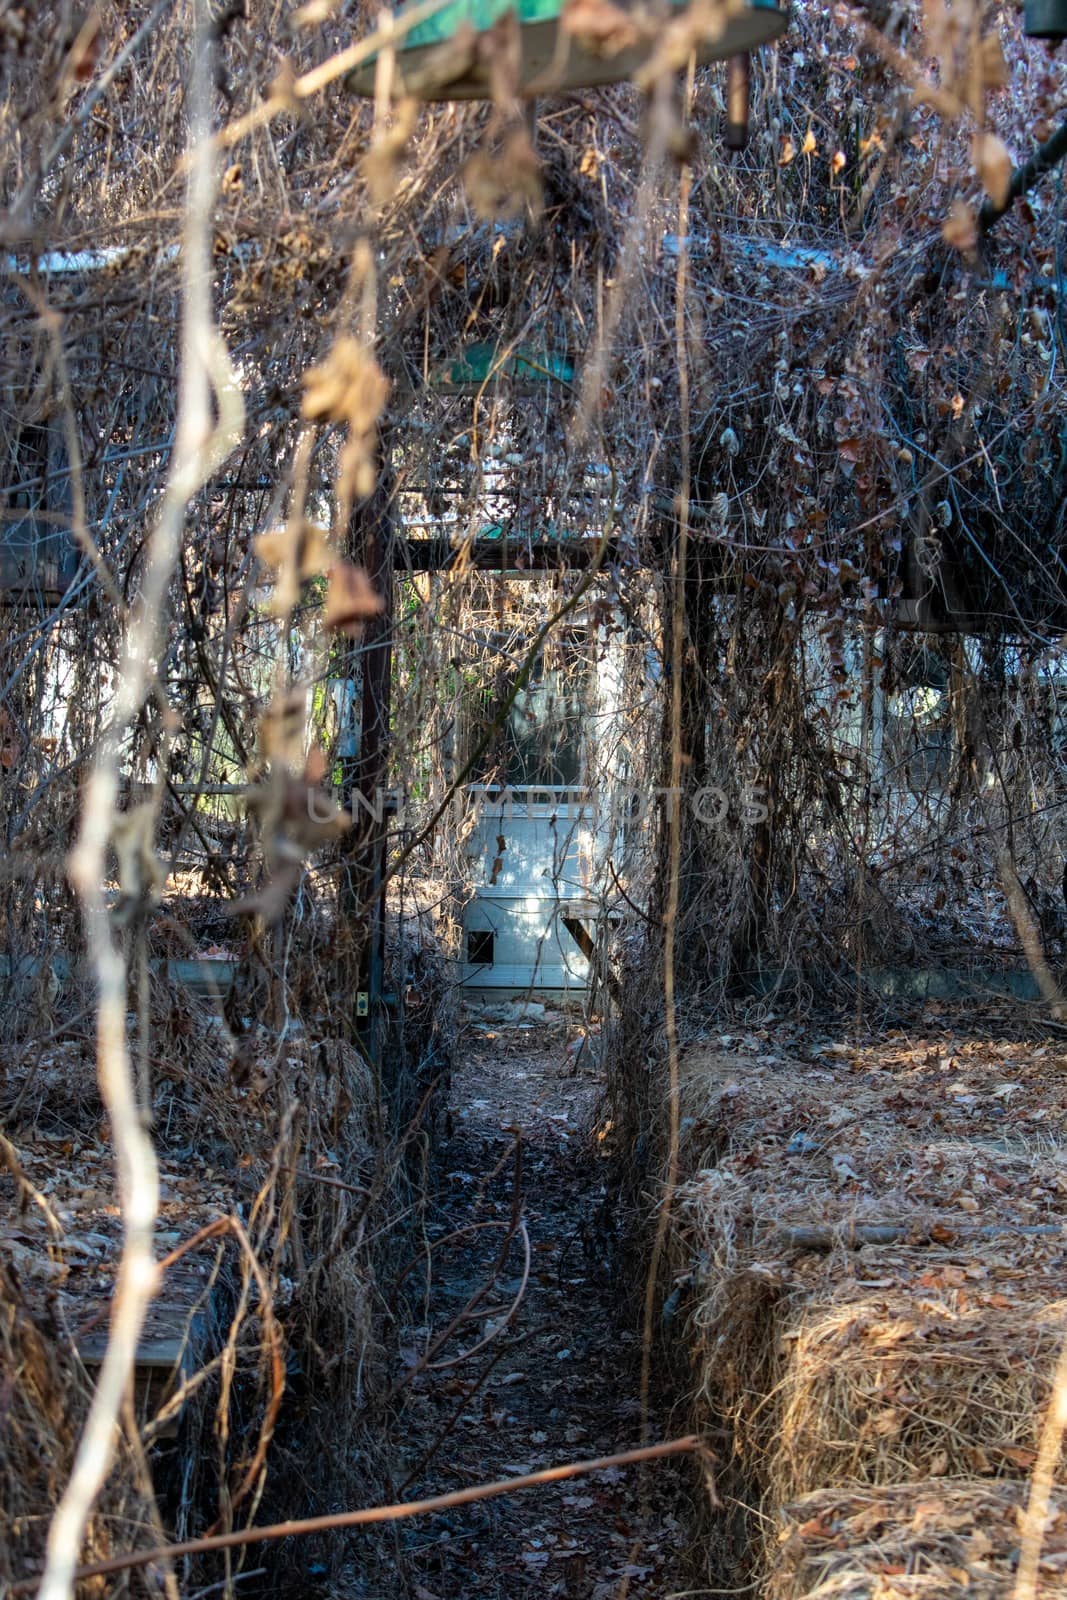 Inside an Abandoned Greenhouse Full of Dead Vines Hanging From t by bju12290